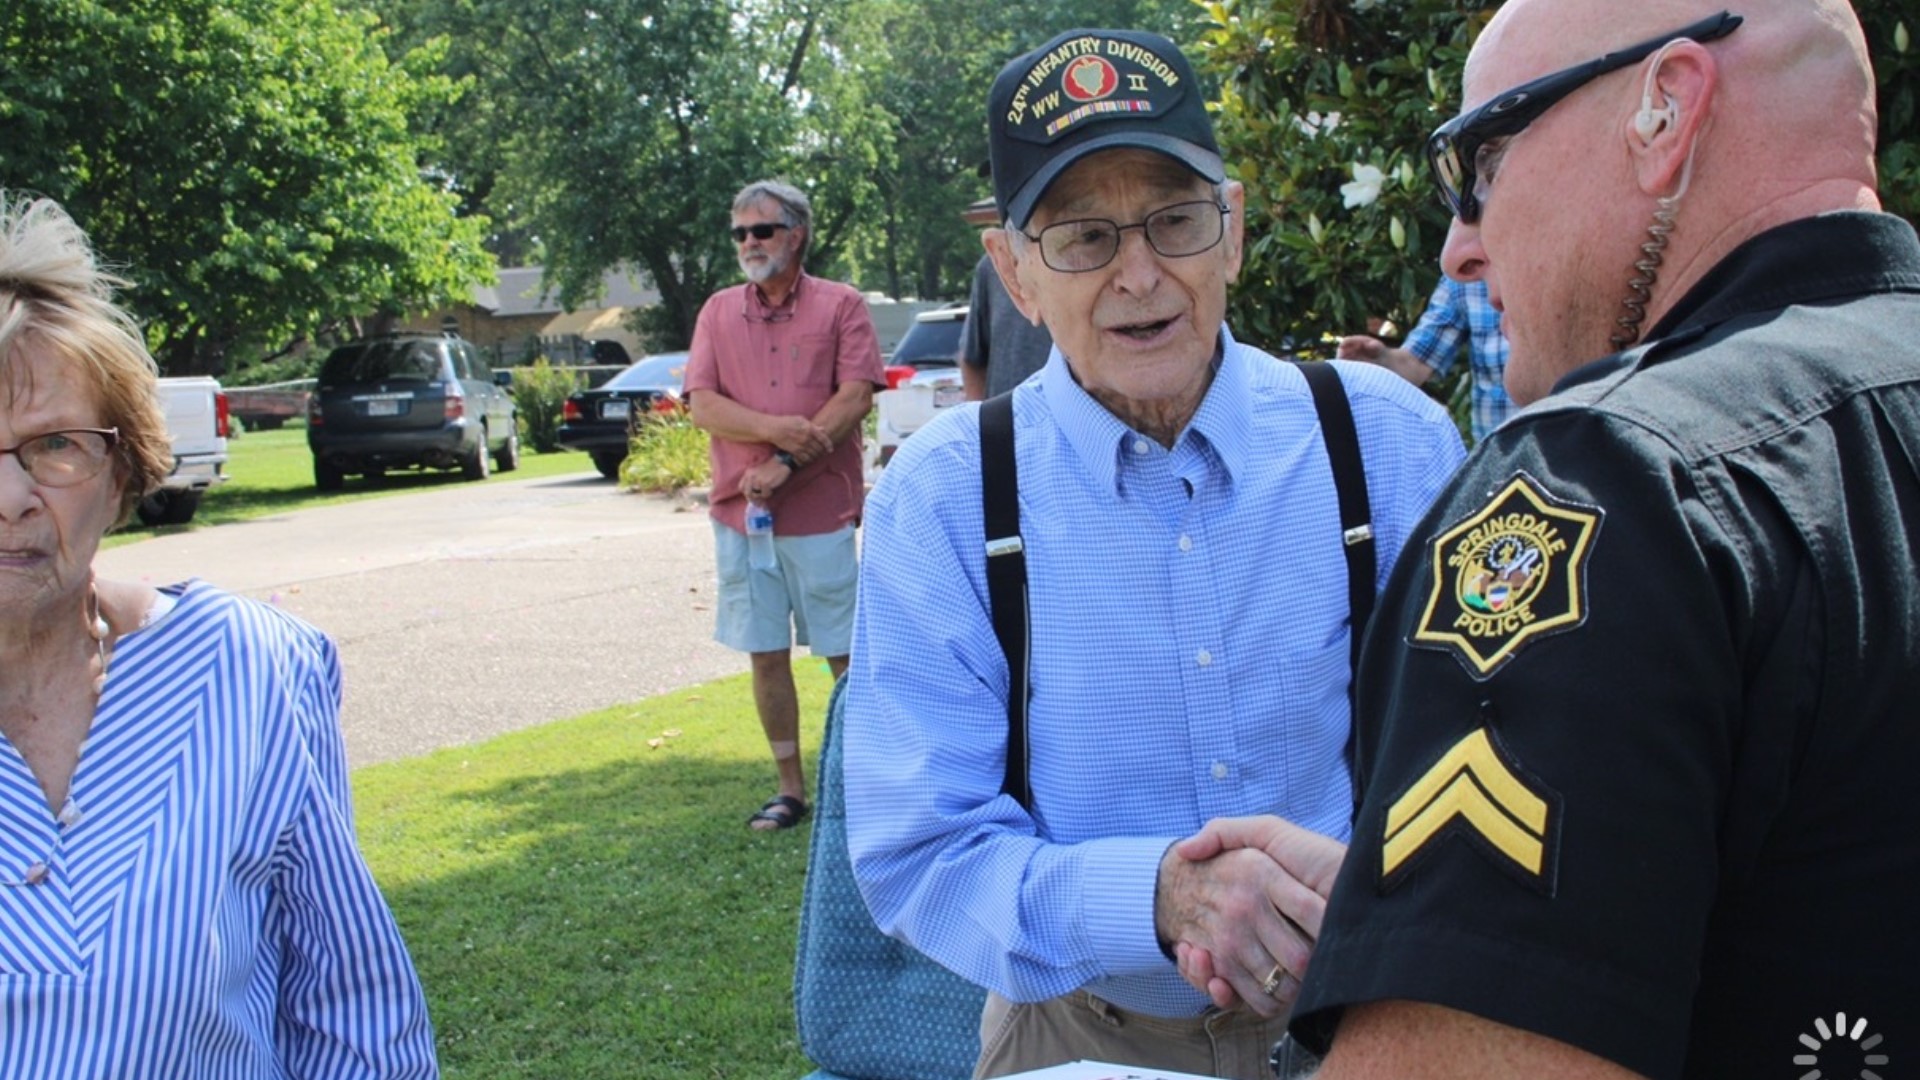 The community of Springdale held a surprise birthday parade for Harry Joyner, a WWII veteran who is turning 97-years-old.